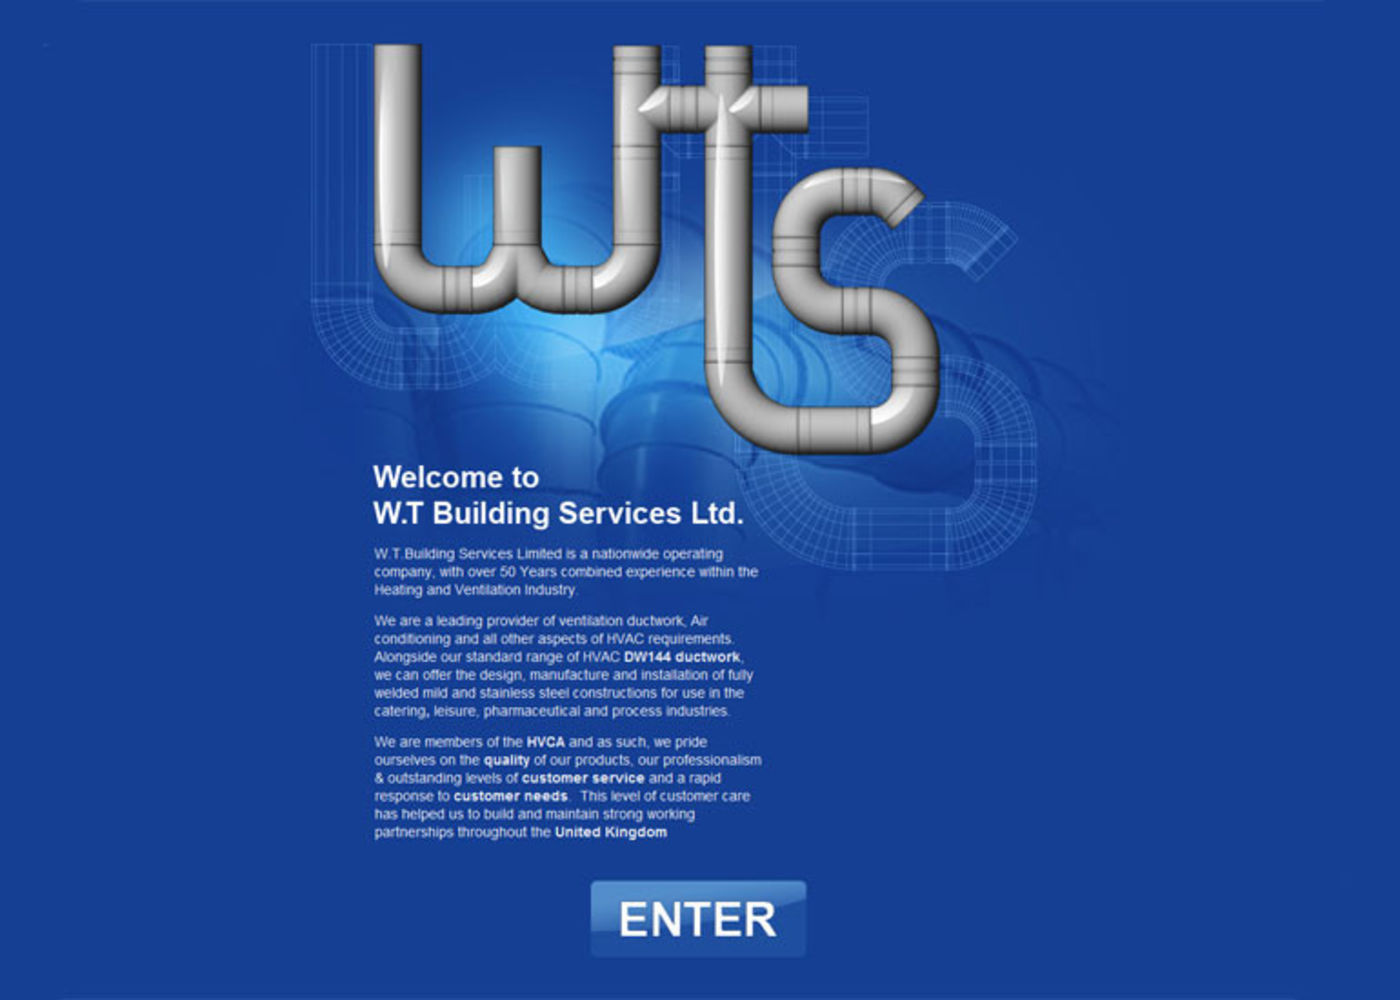 W.T. Building Services Welcome